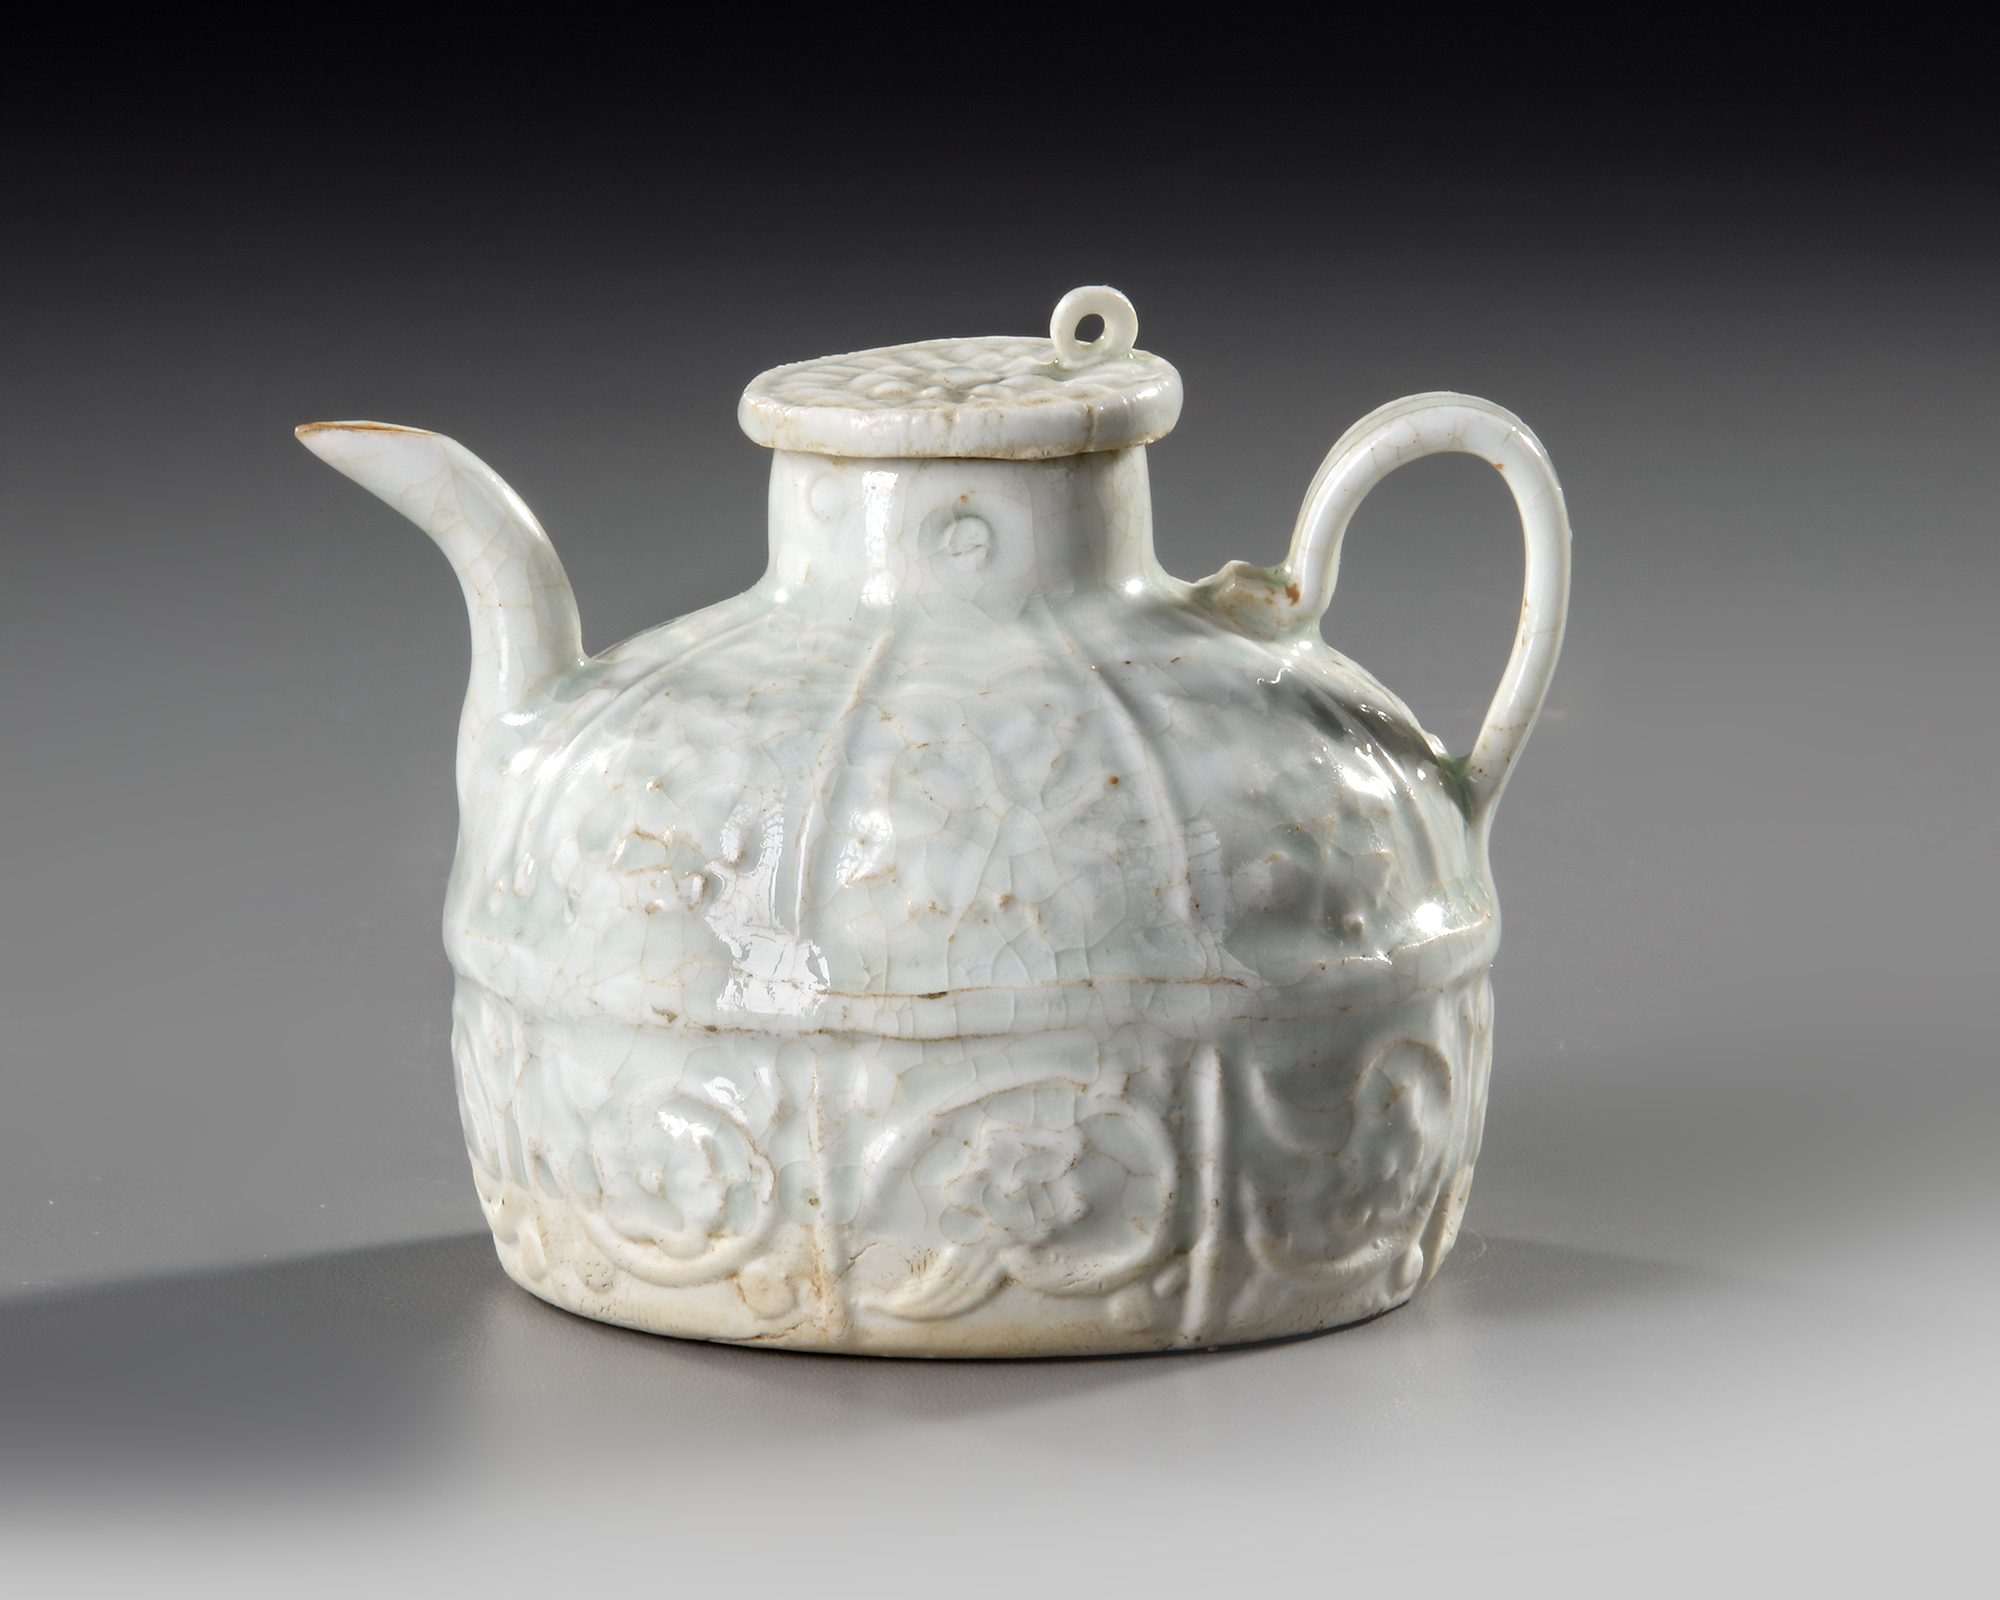 A SMALL CHINESE QINGBAI EWER, SONG DYNASTY (960-1279) - Image 2 of 5